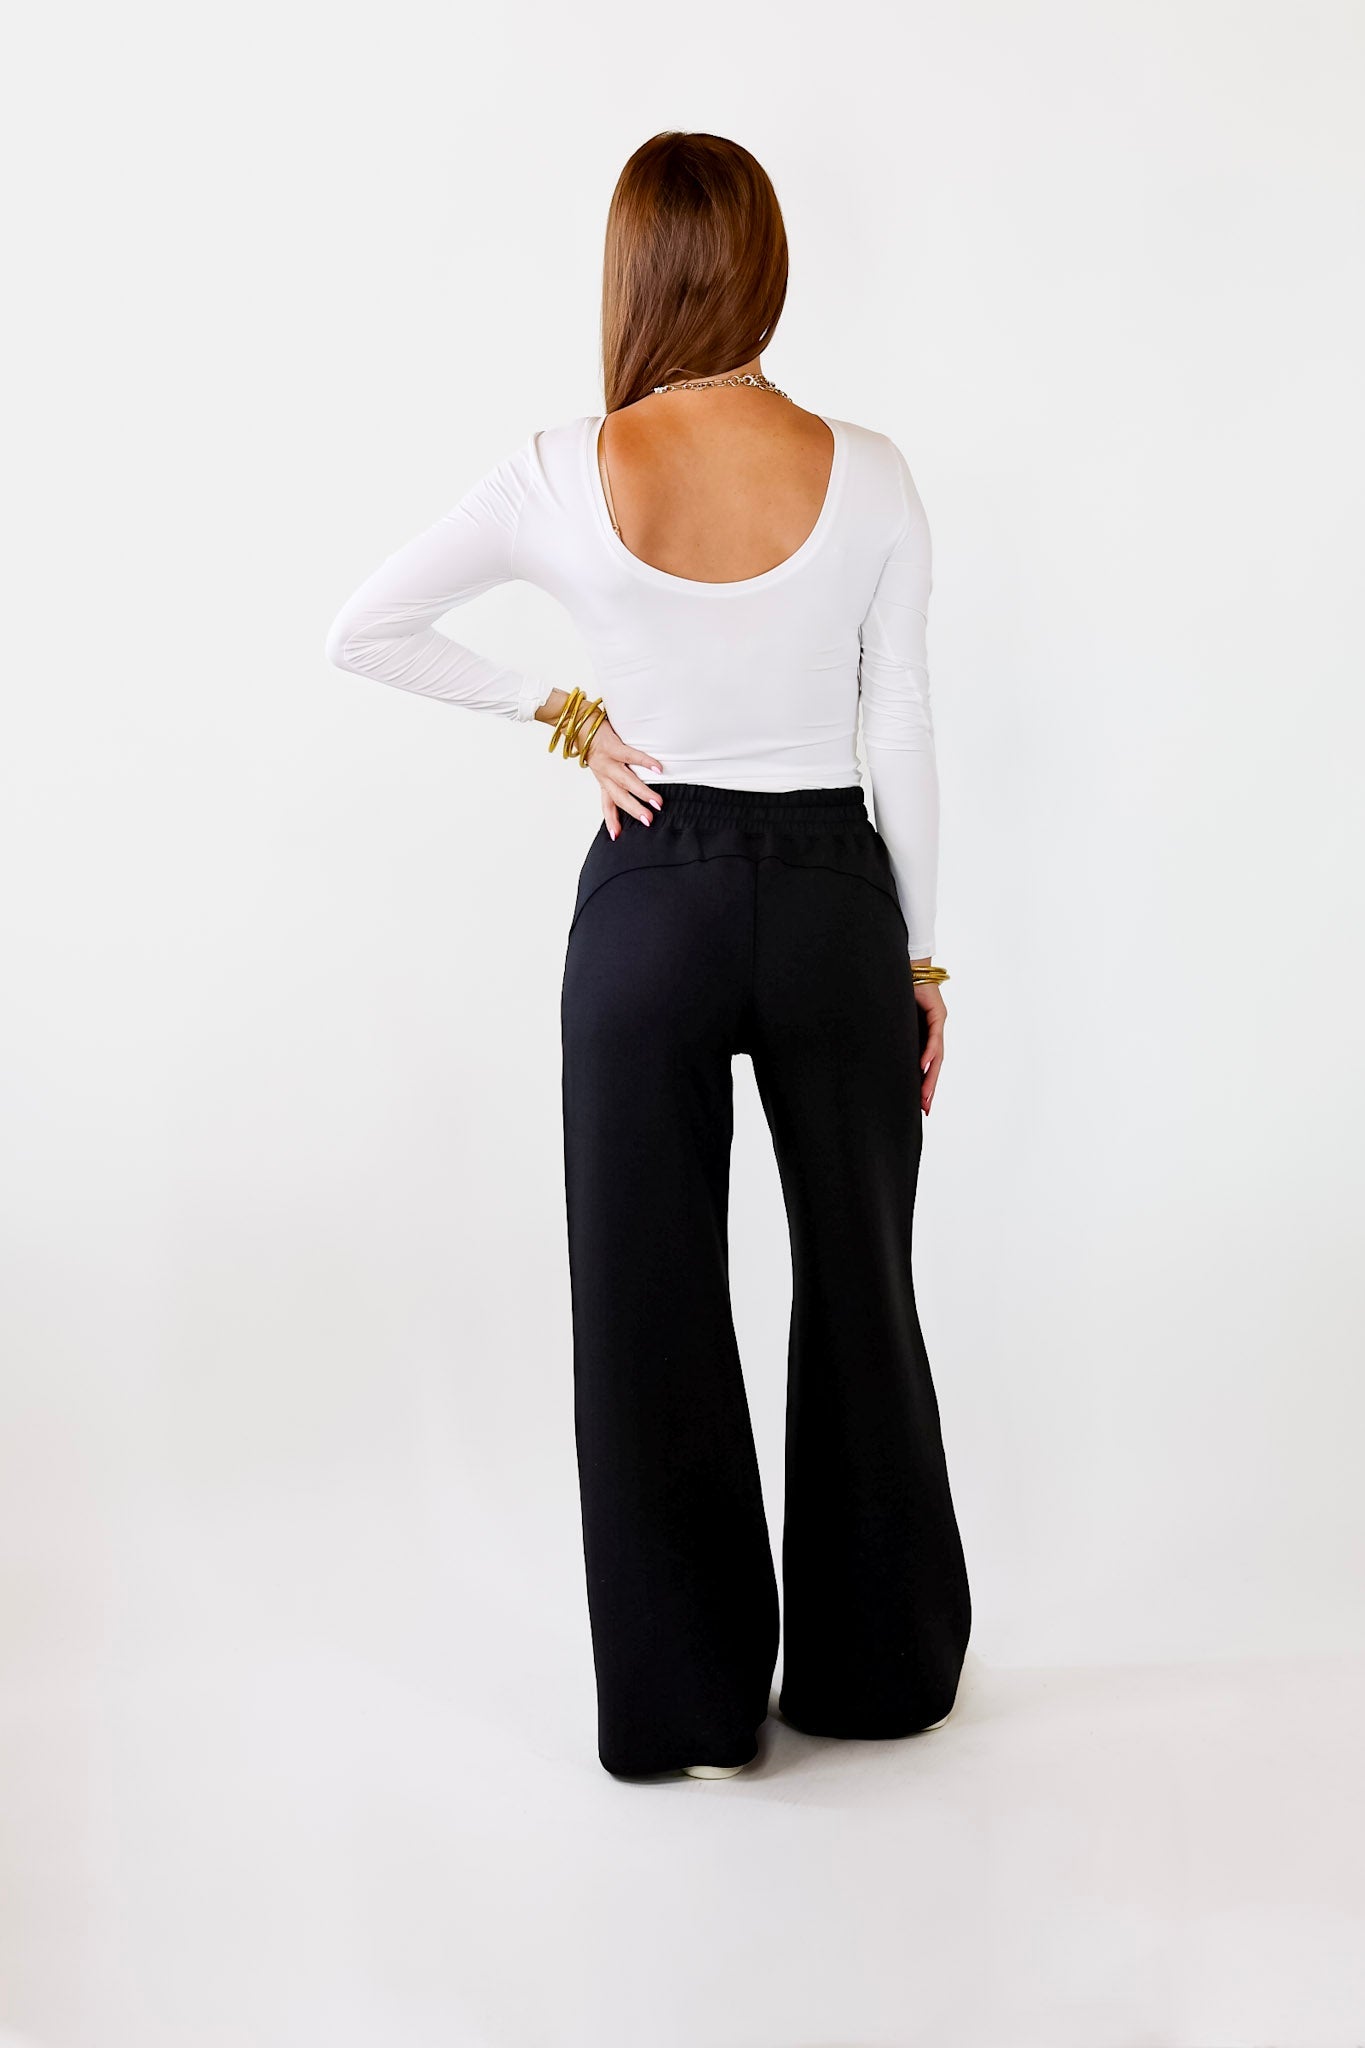 SPANX | Suit Yourself Long Sleeve Scoop Neck Bodysuit in White - Giddy Up Glamour Boutique